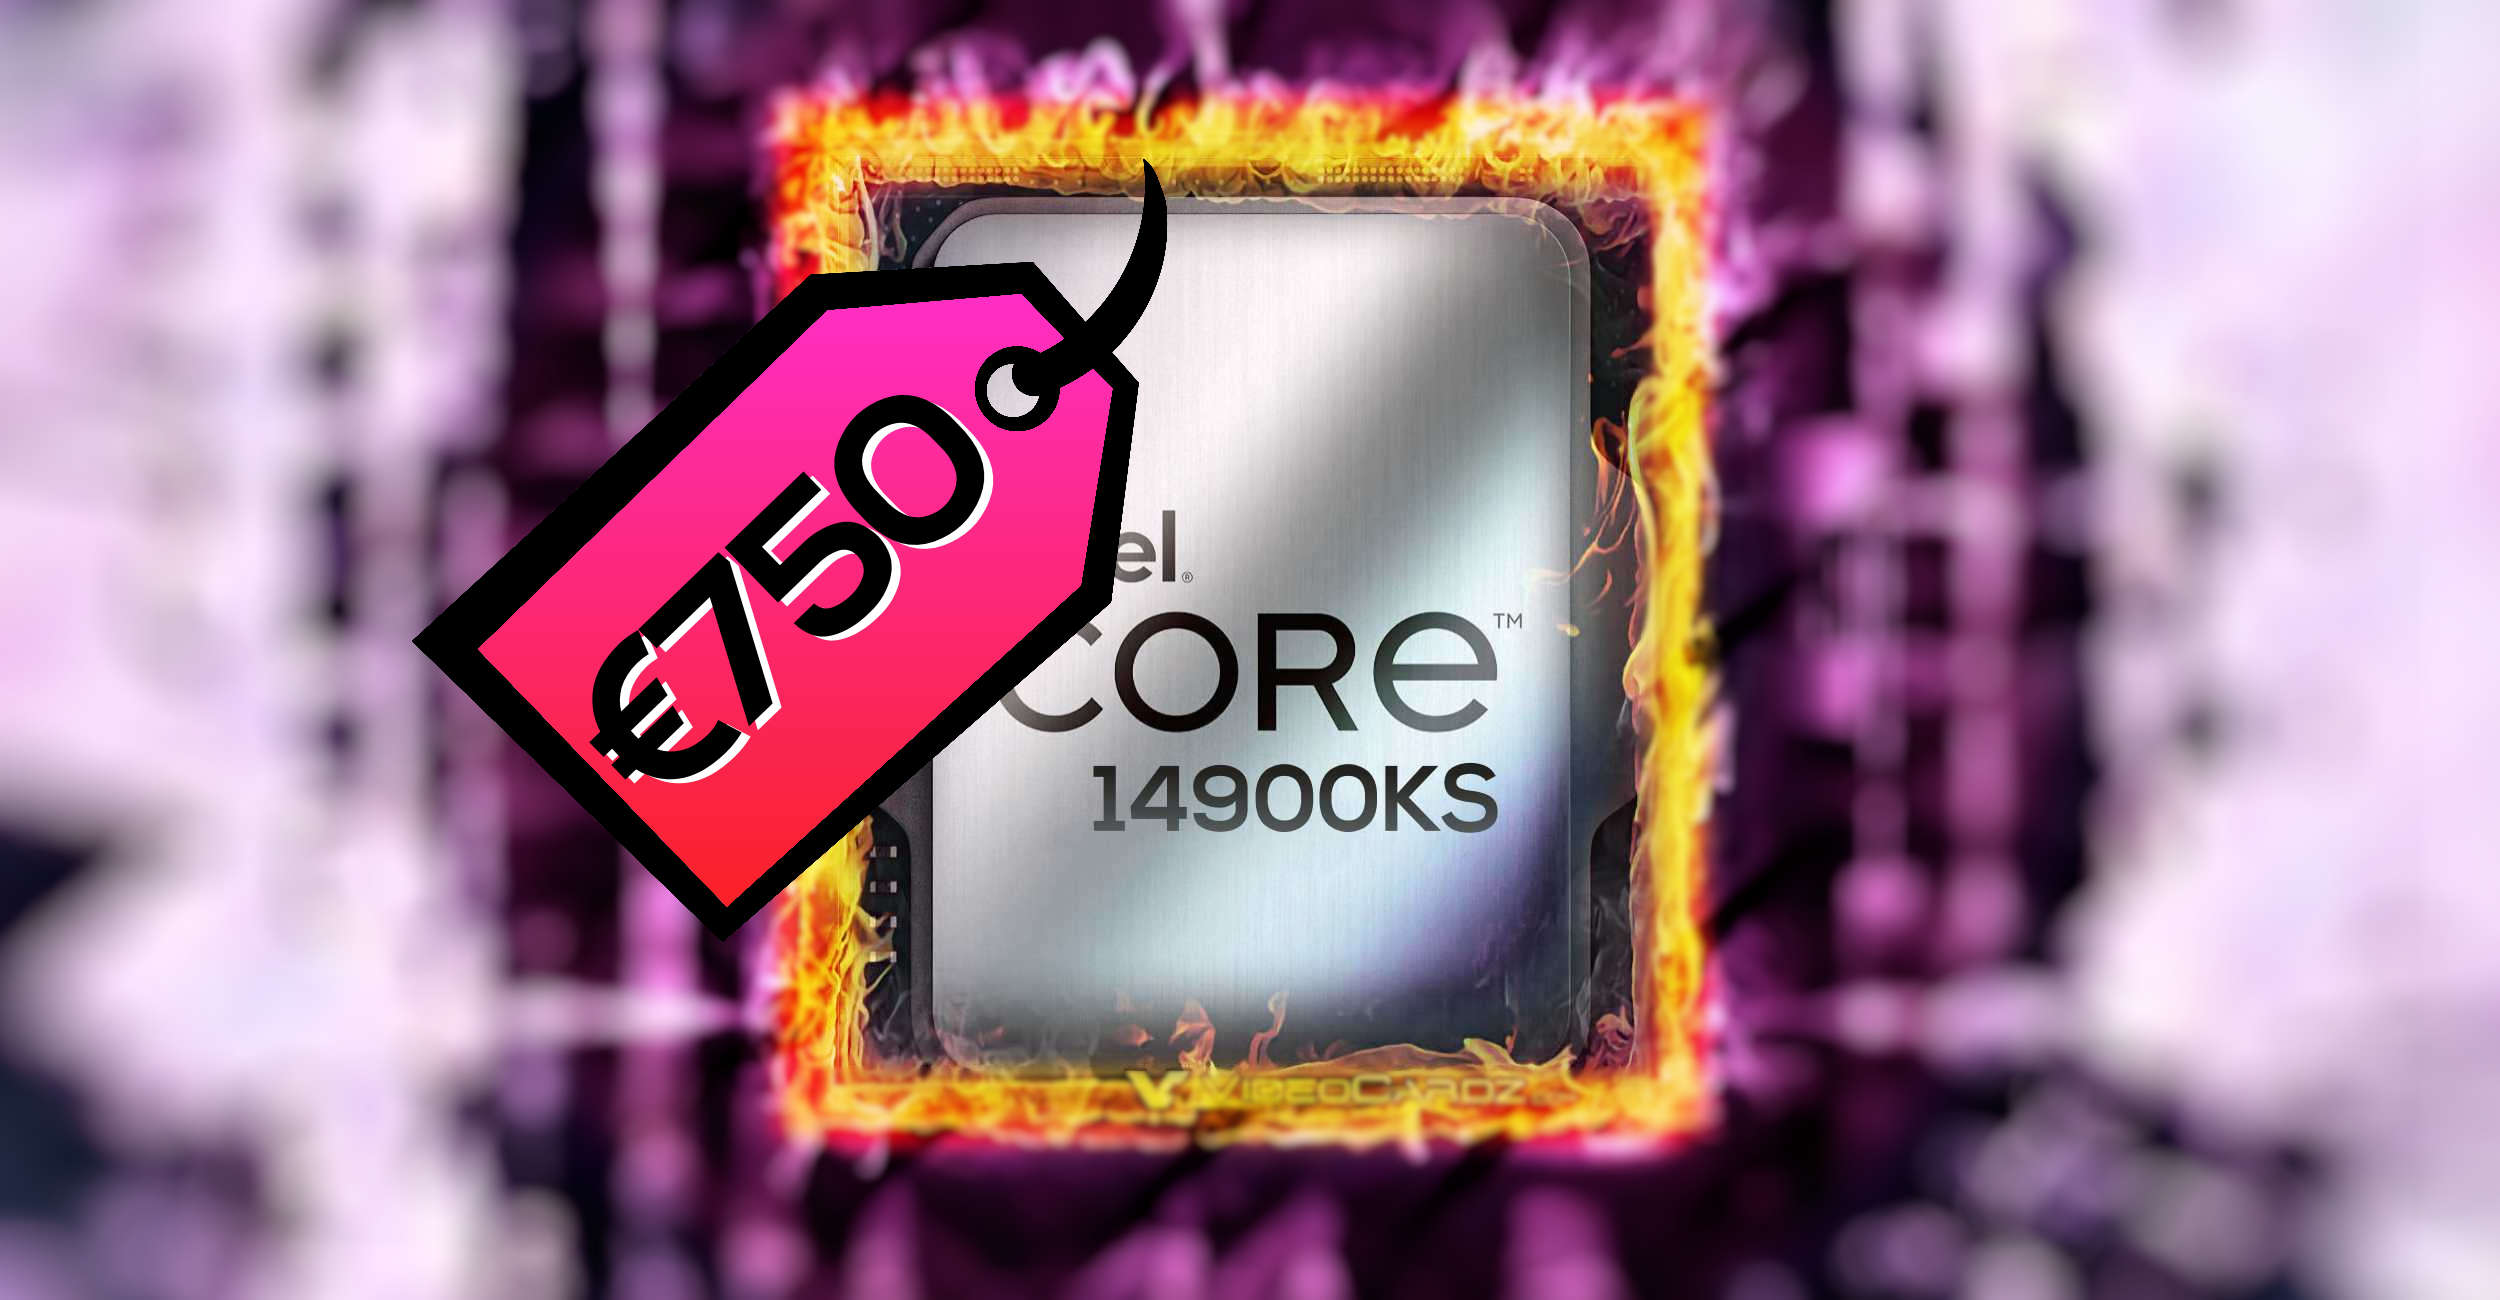 Intel Core i9-14900KS 6.2 GHz SKU Now Available for Purchase at €750 in France